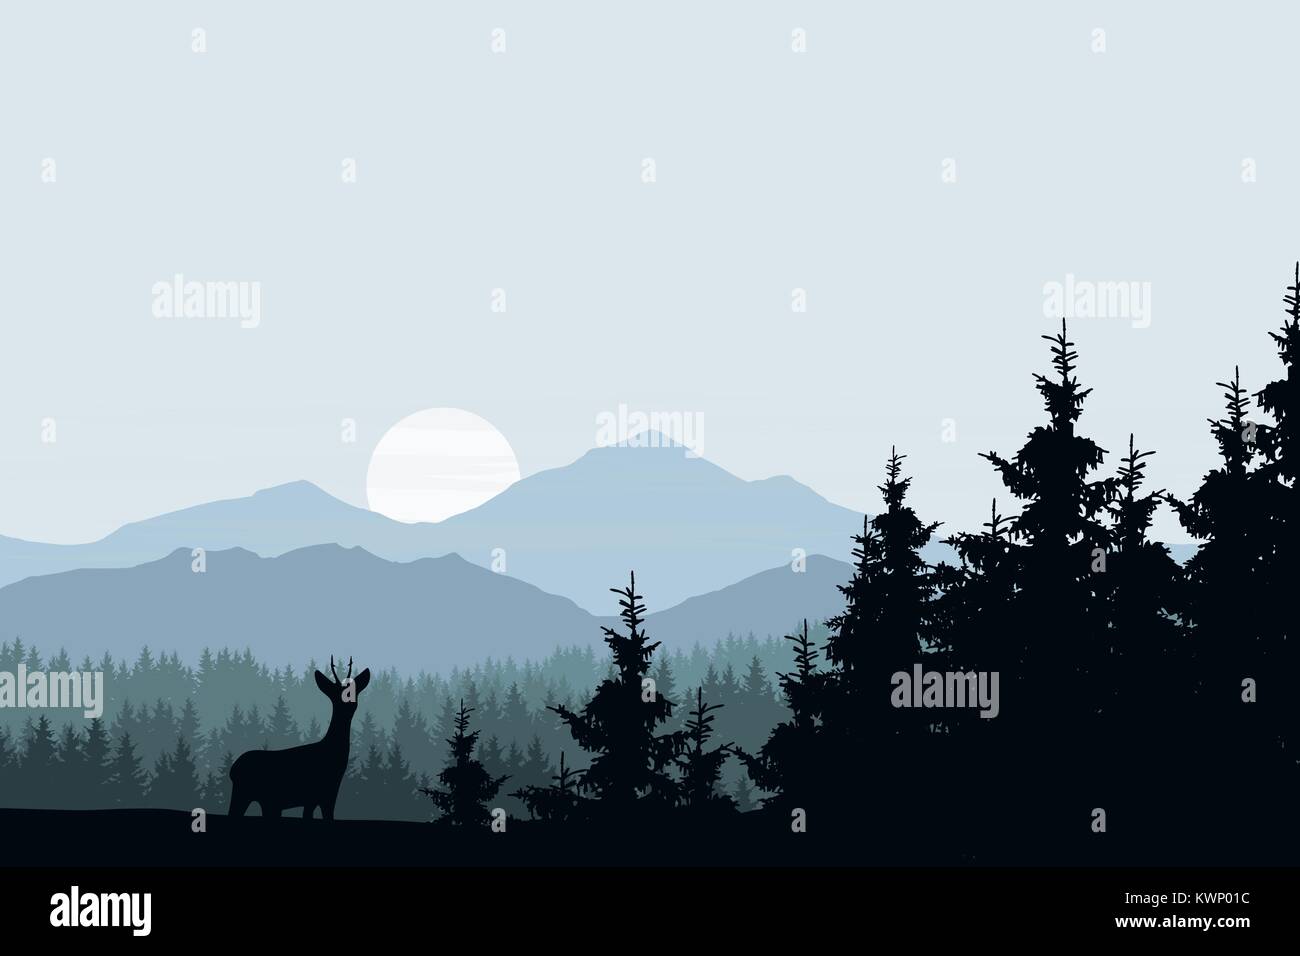 Realistic vector illustration of mountain landscape with forest and deer Stock Vector